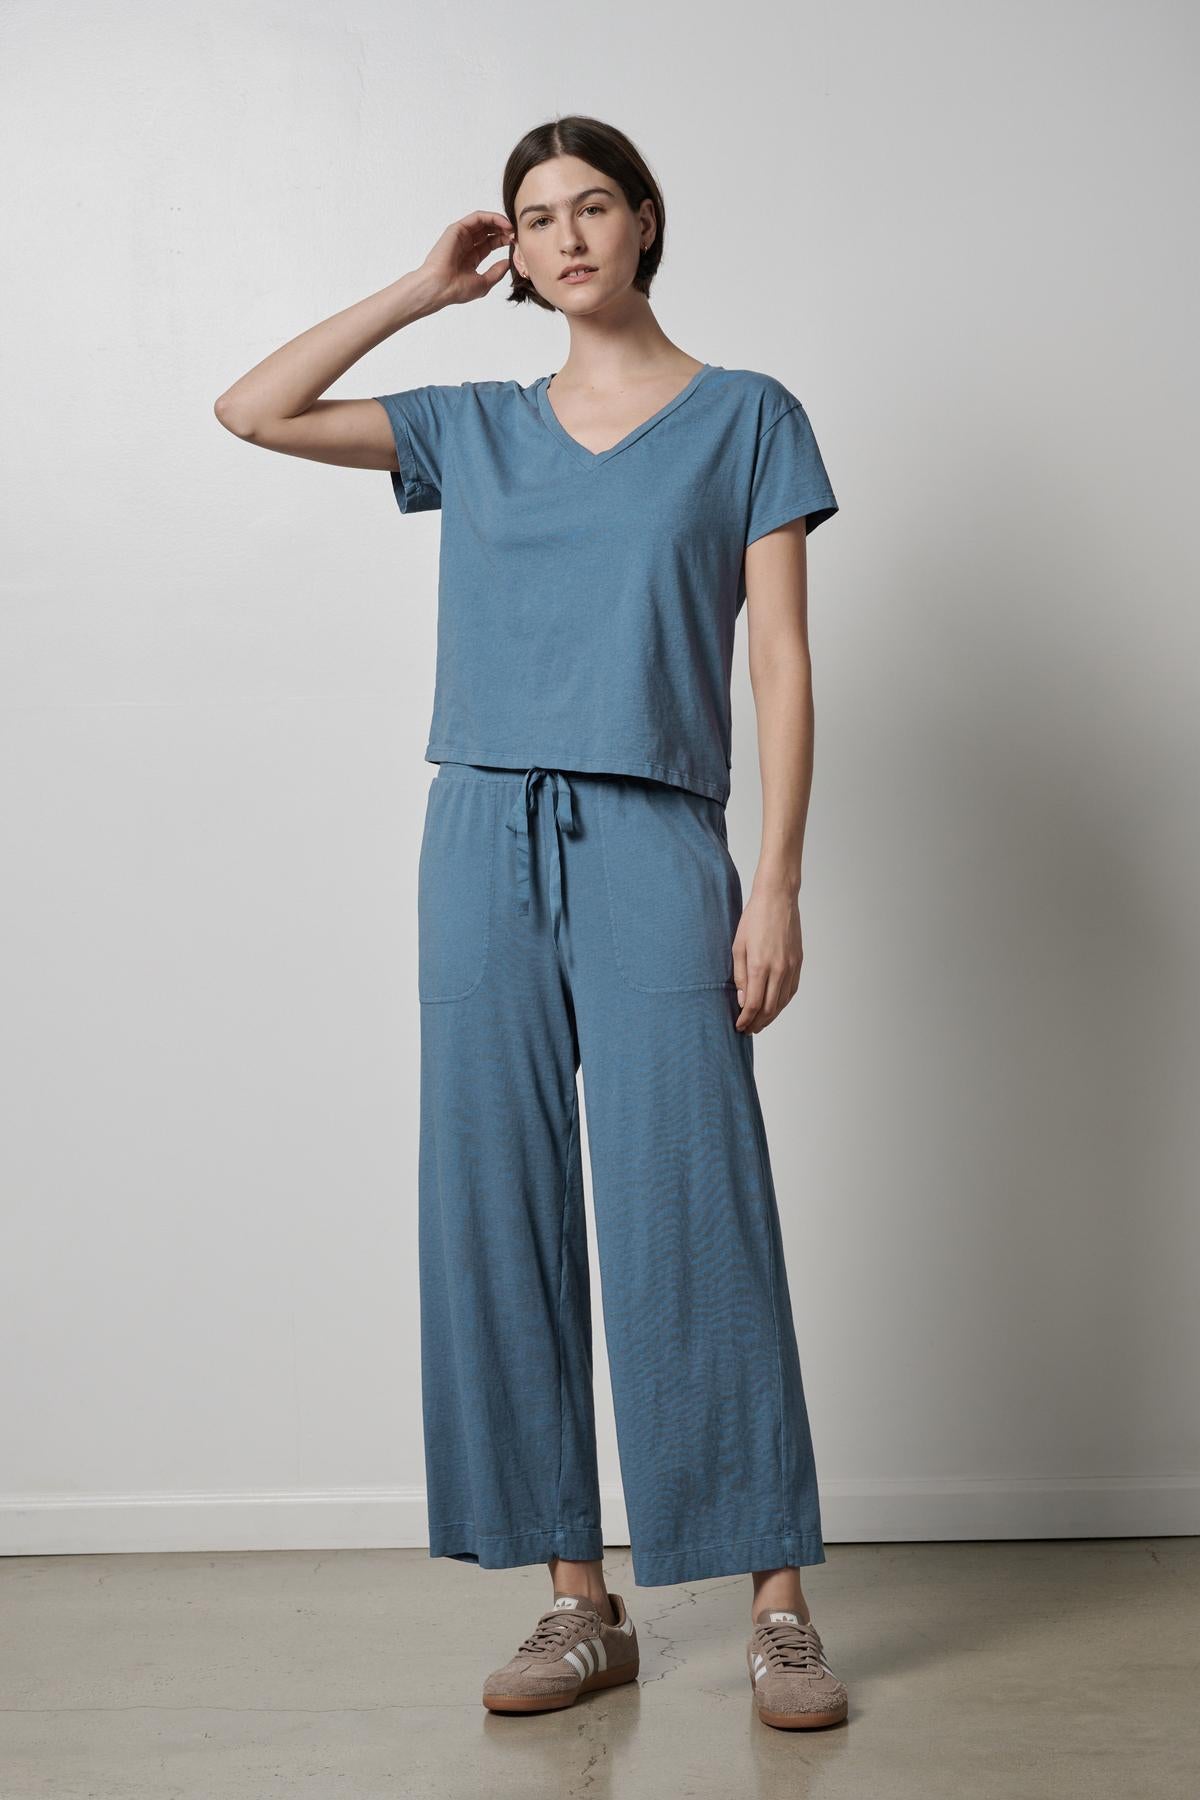   The model is wearing a blue PISMO PANT jumpsuit with slash pockets made of organic cotton by Velvet by Jenny Graham. 